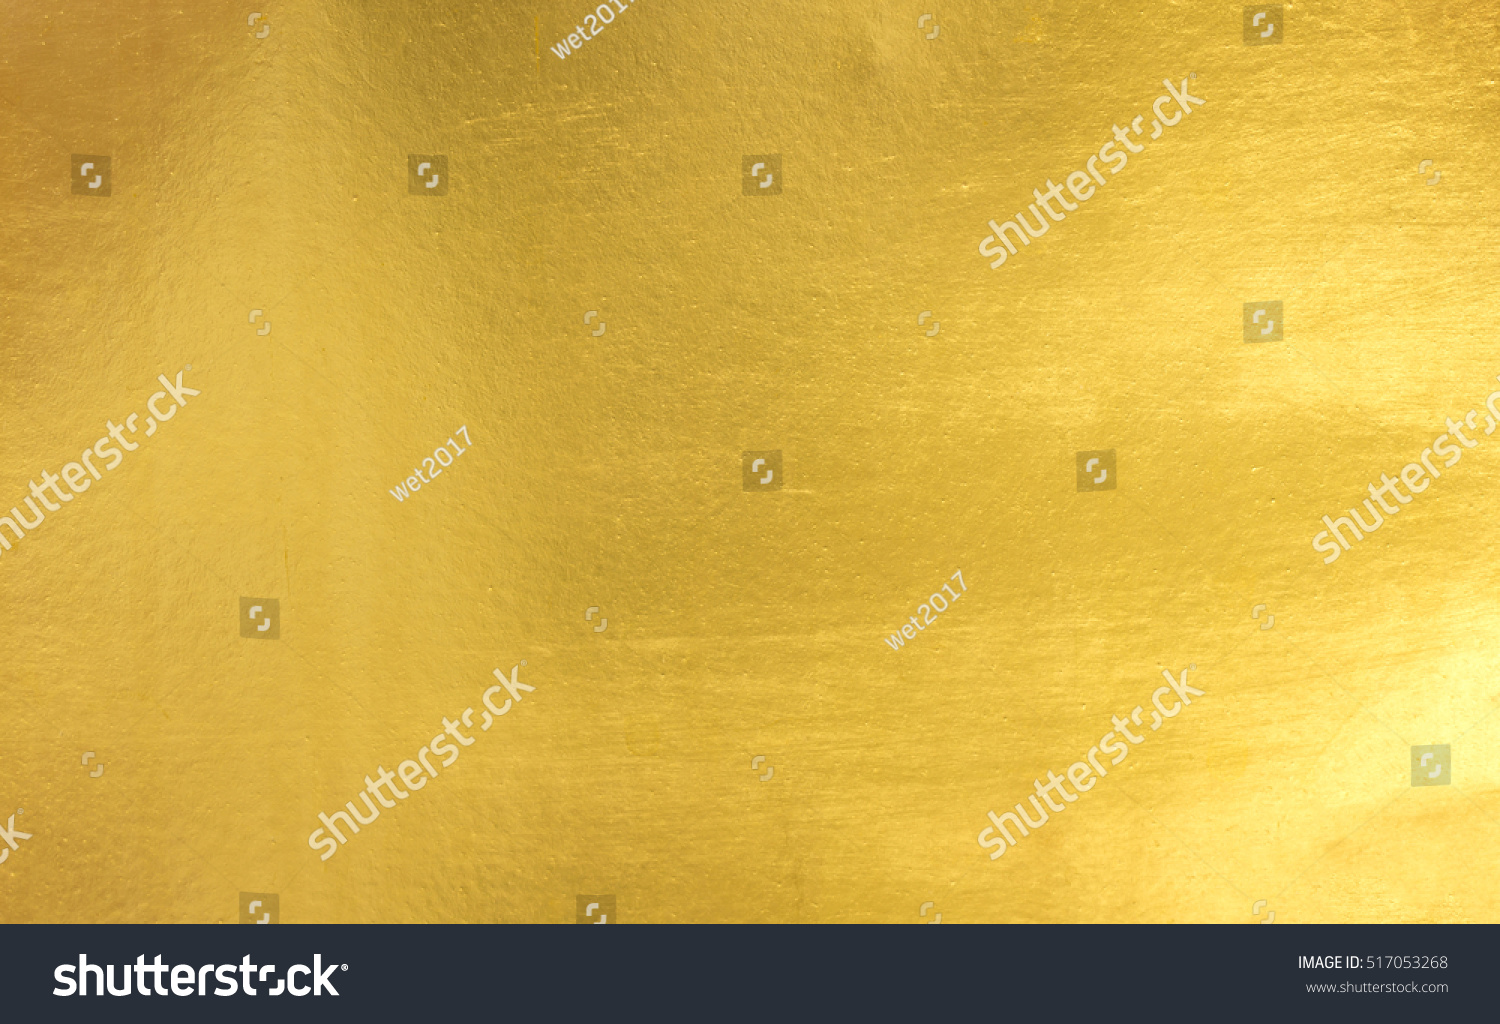 Shiny yellow leaf gold foil texture background #517053268